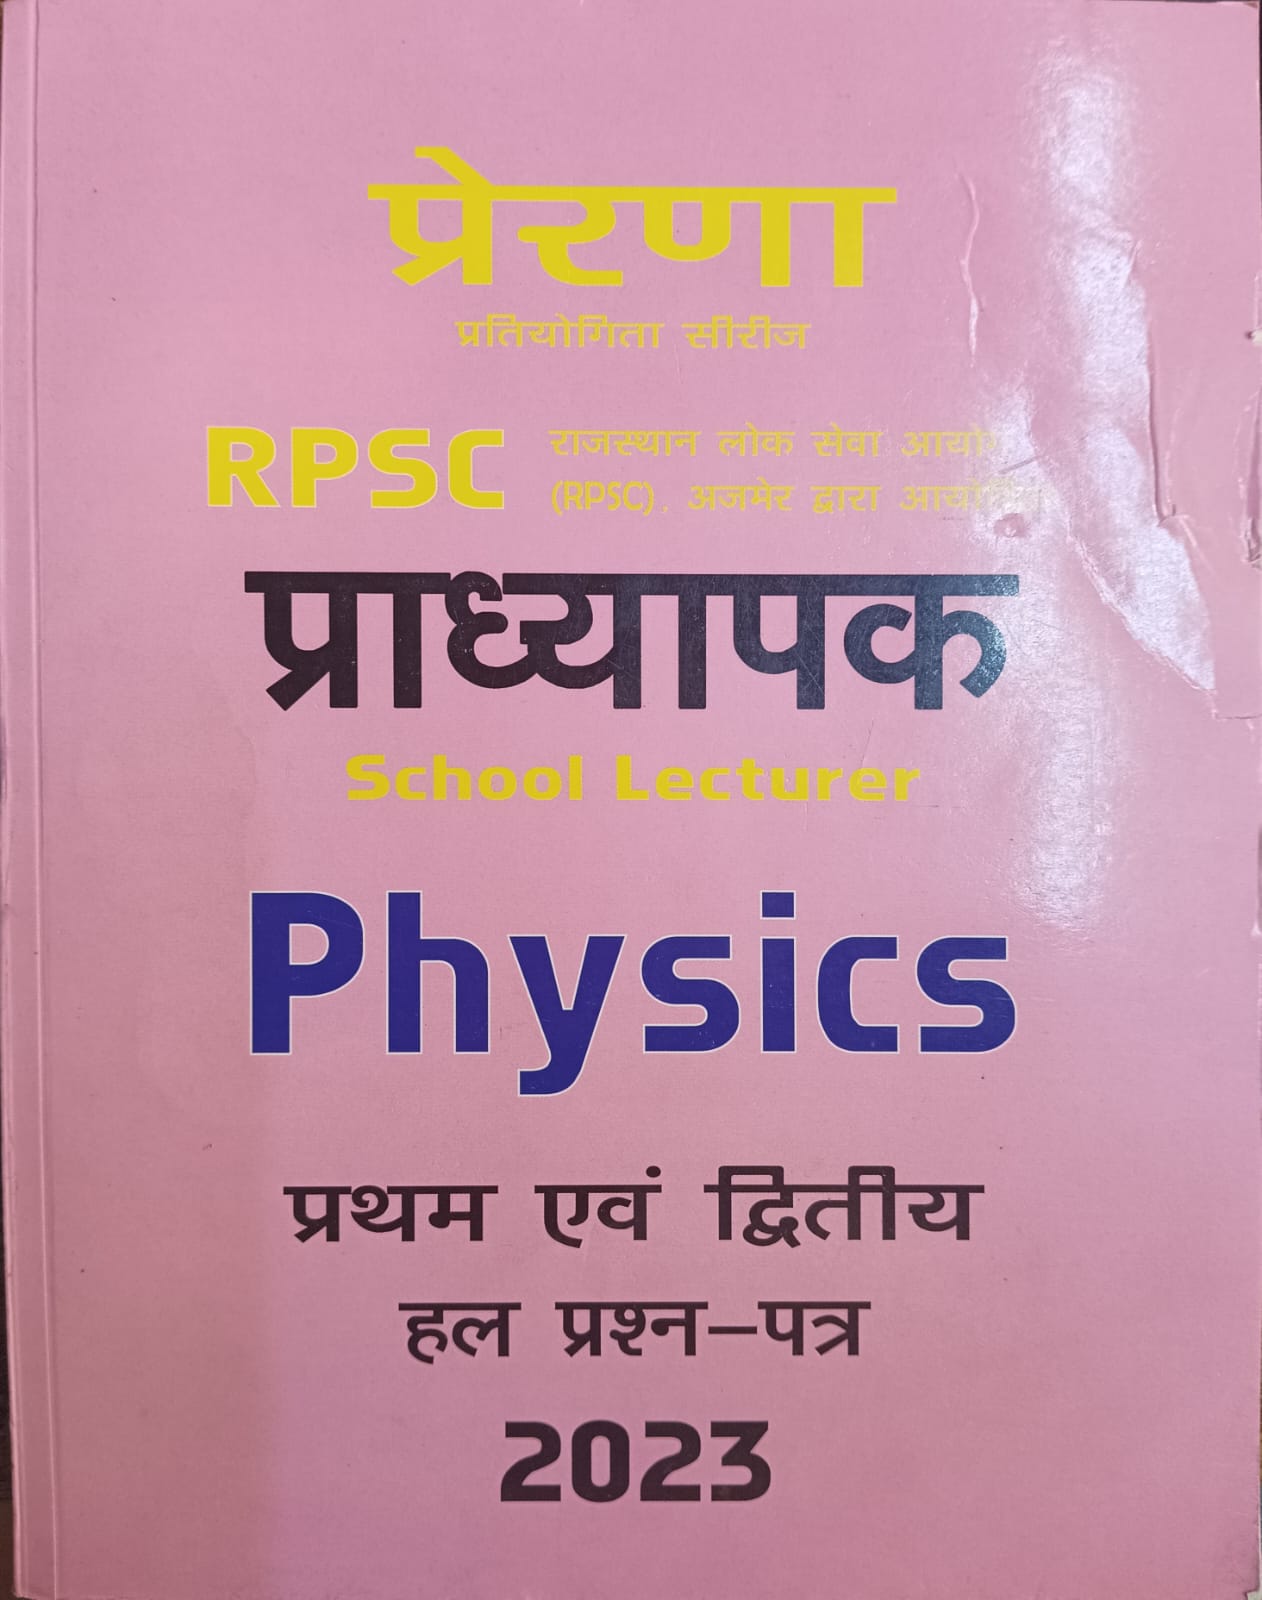 Prarna RPSC school lecturer physics and 1st paper solved paper 2023